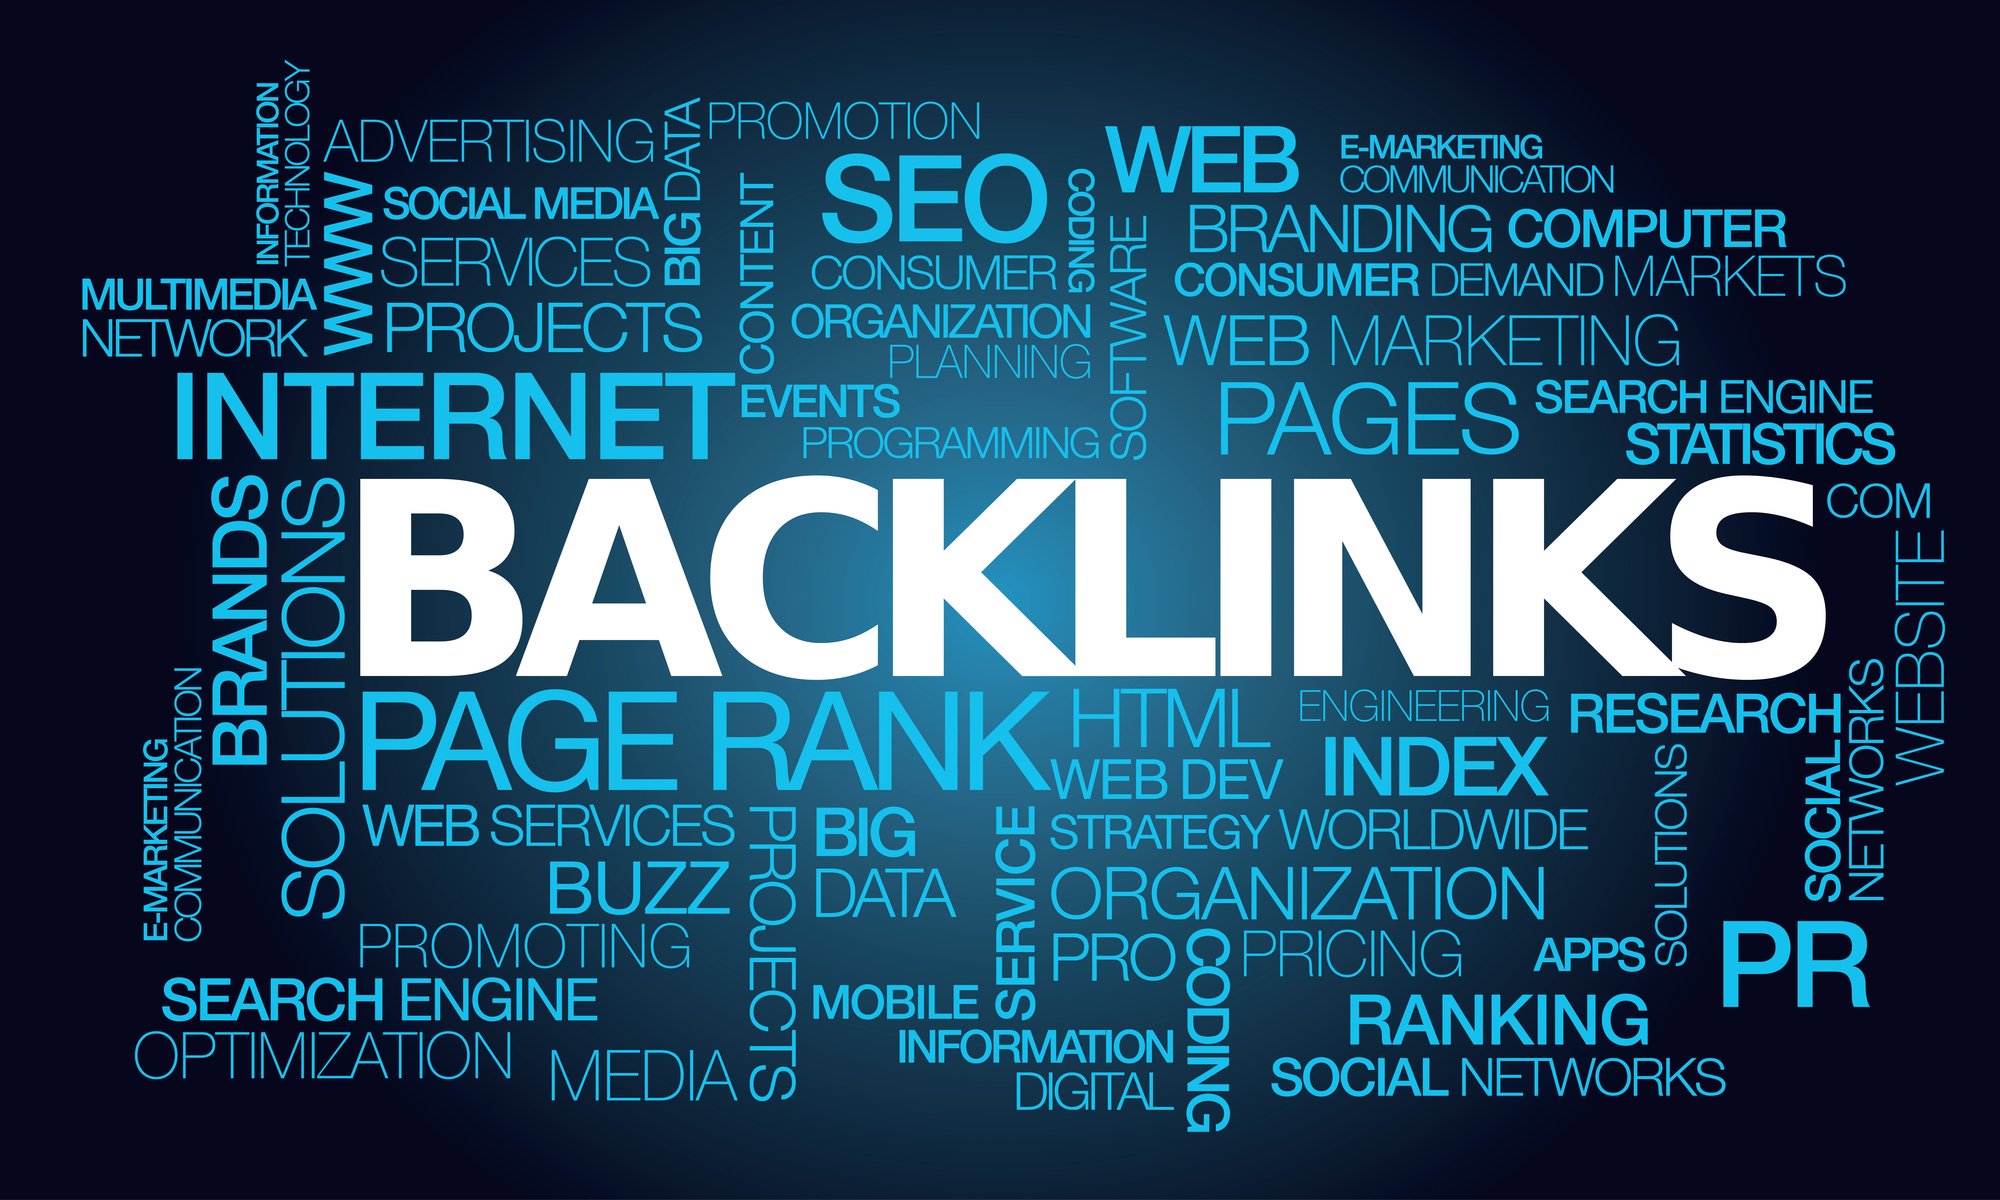 How Important Are Backlinks for SEO?